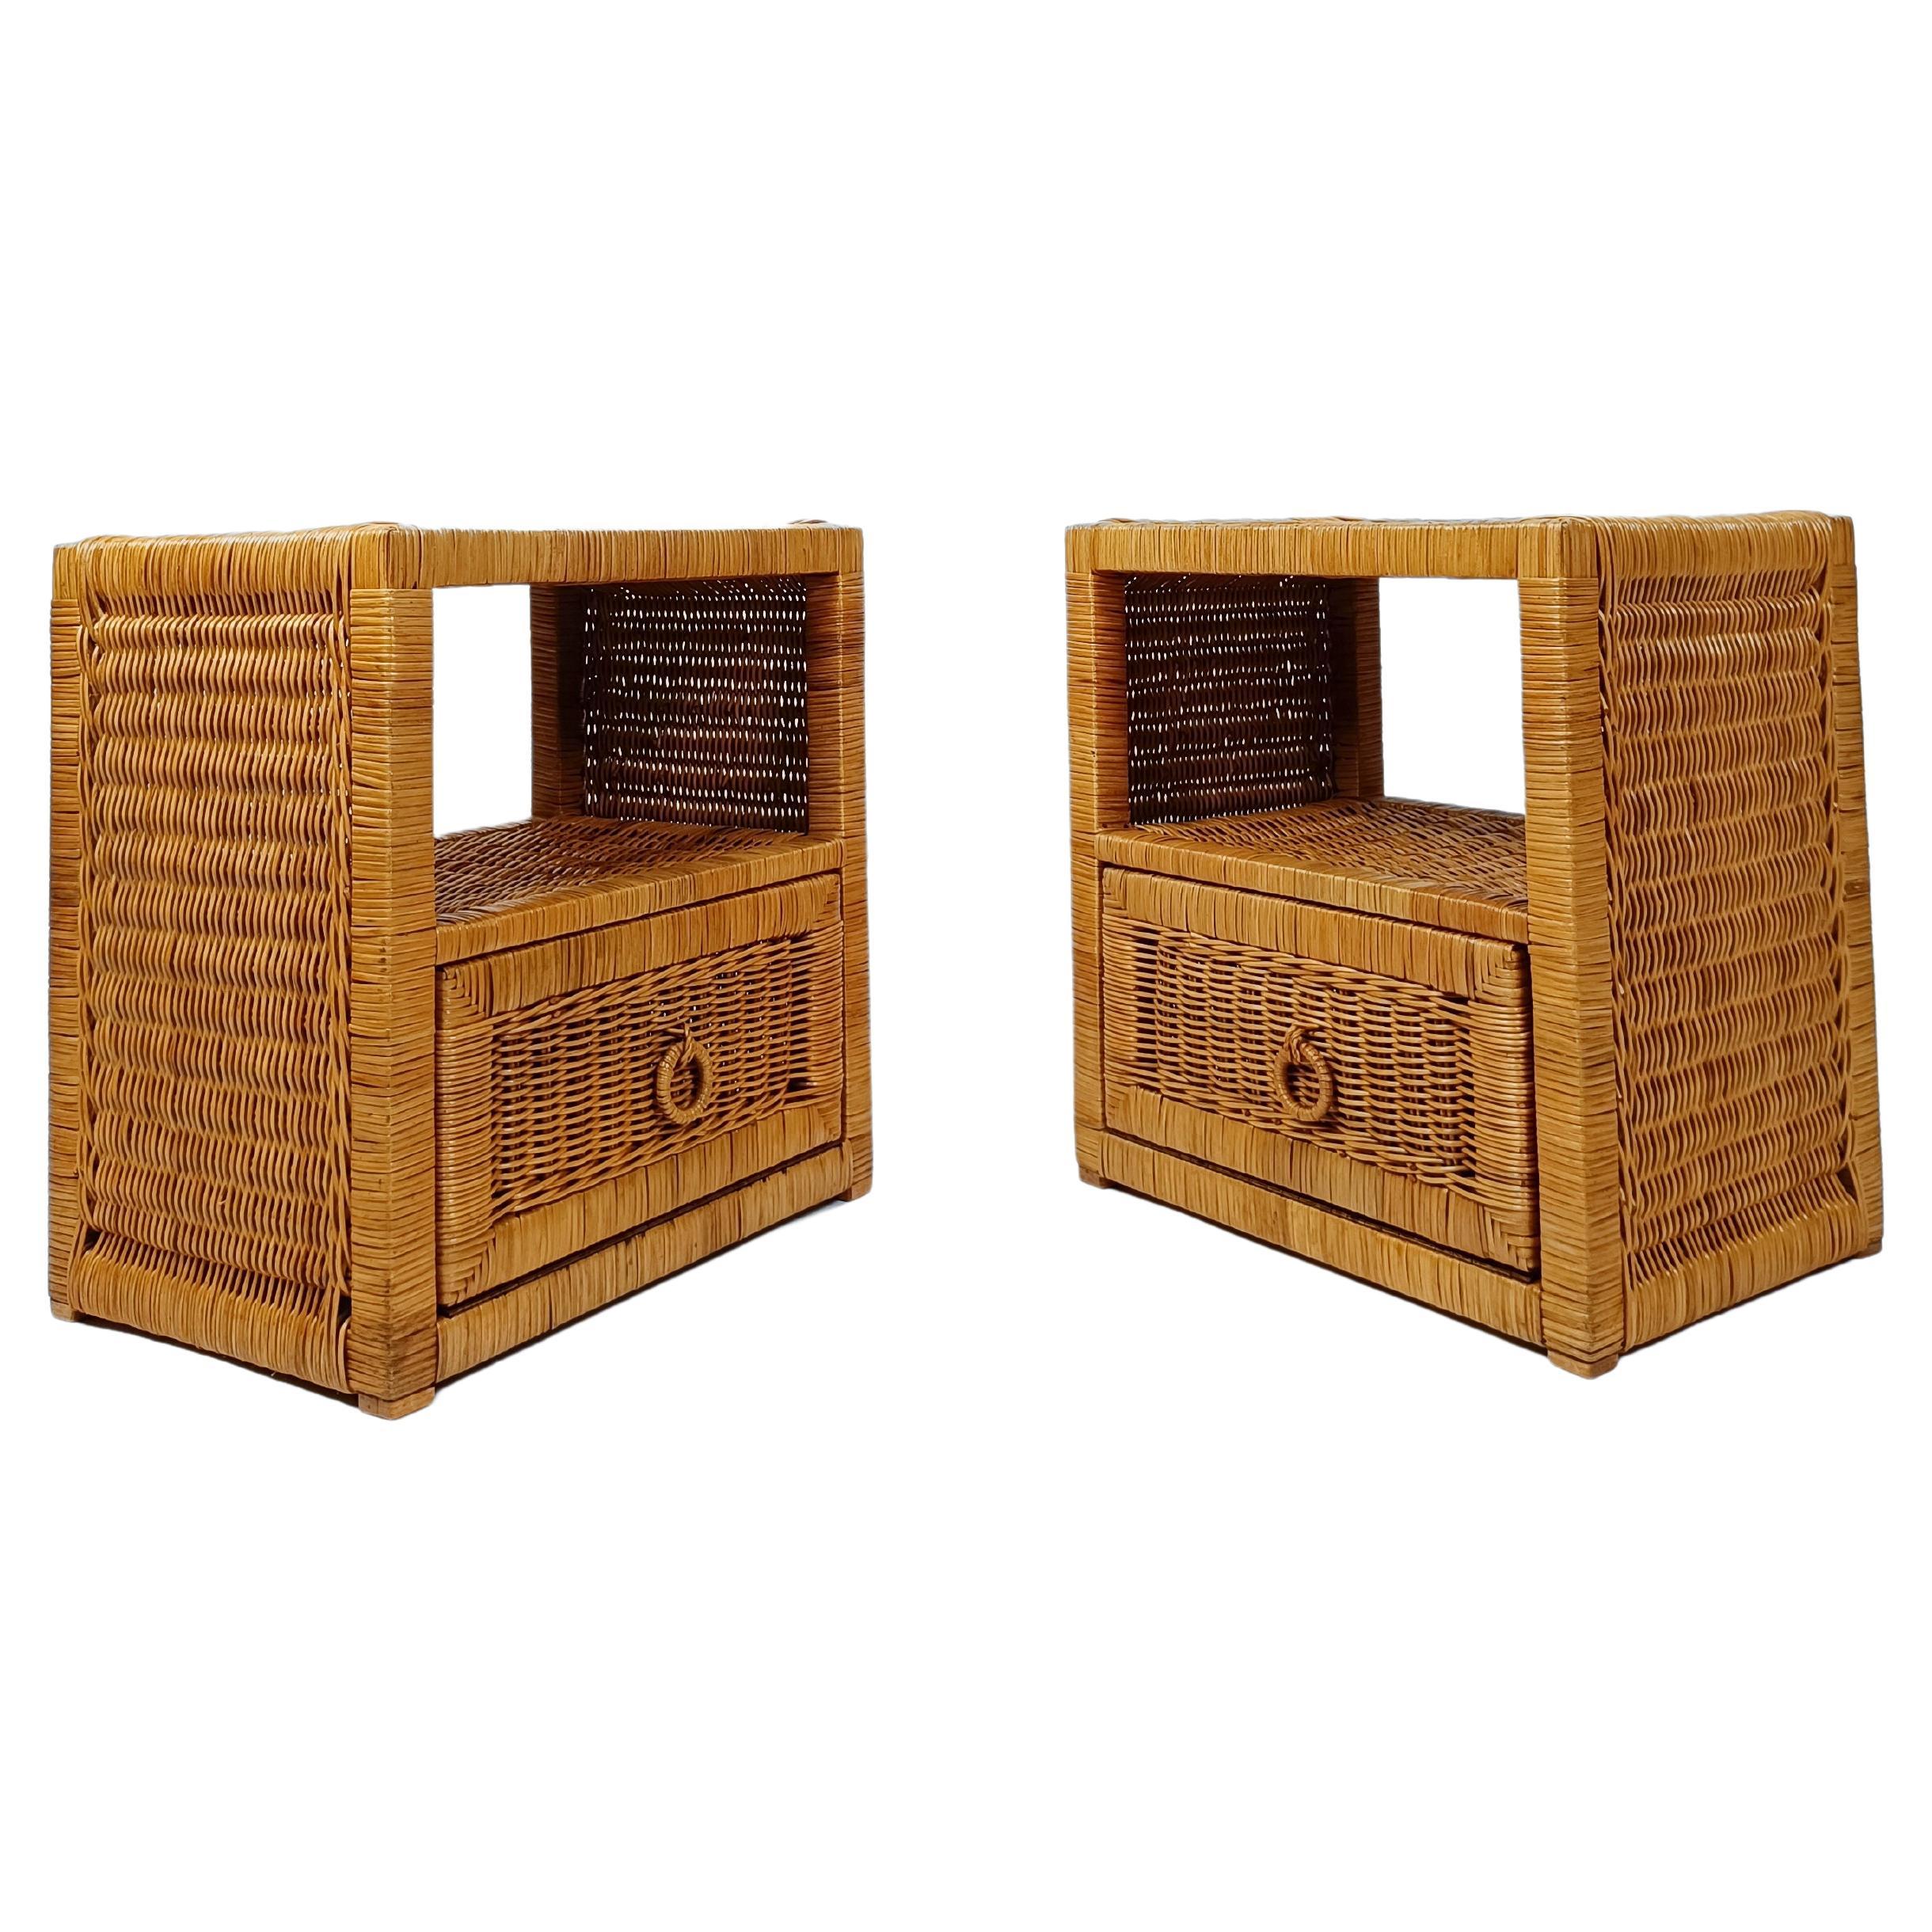 Pair of Woven Rattan and Wicker Nightstands / Bedside Tables, Italy 1970s